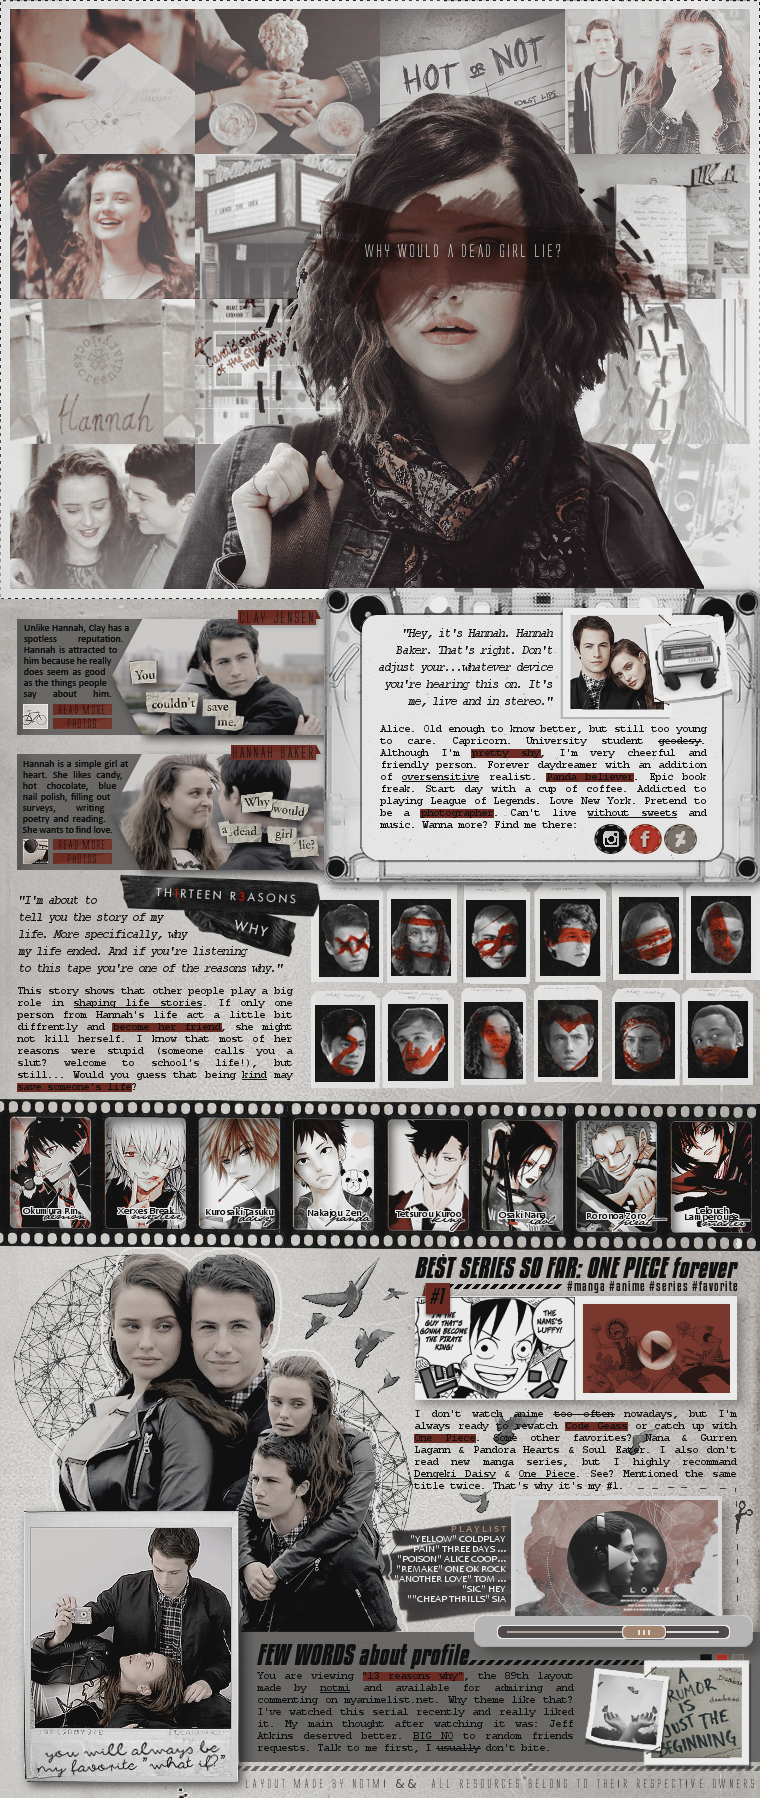 13 reasons why, layout by notmi on DeviantArt